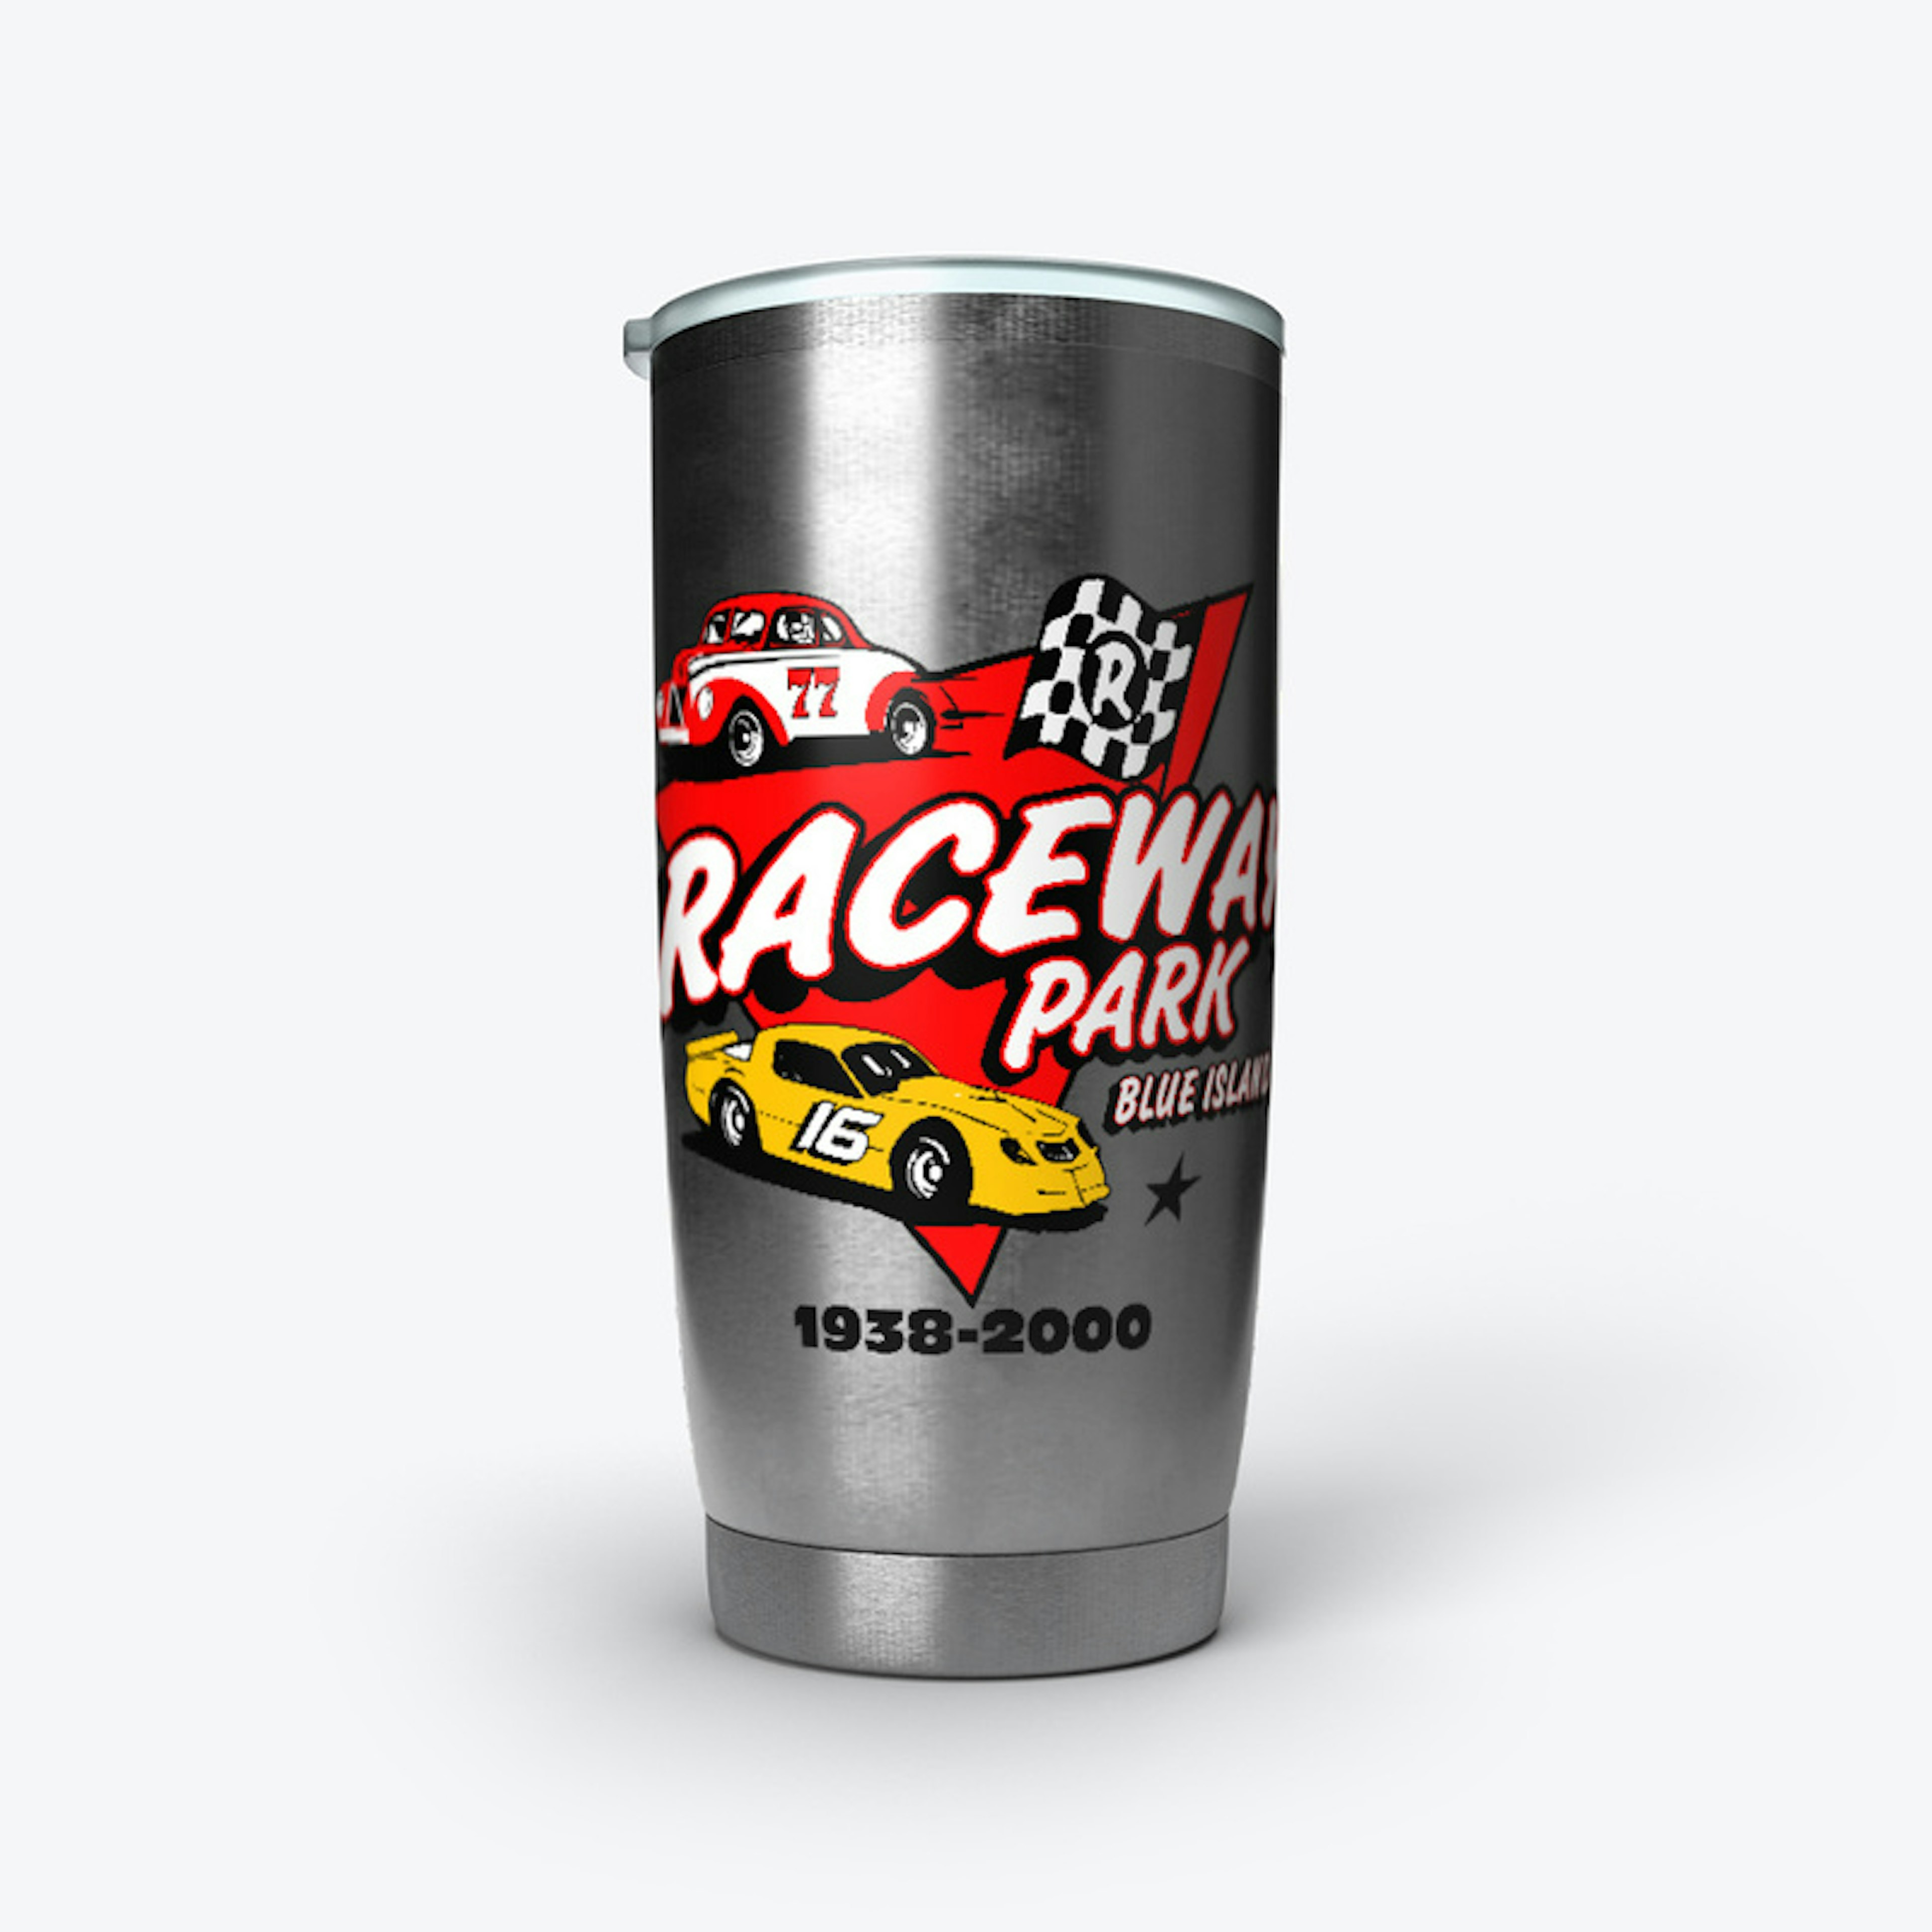 Raceway Park Pint Glass and More